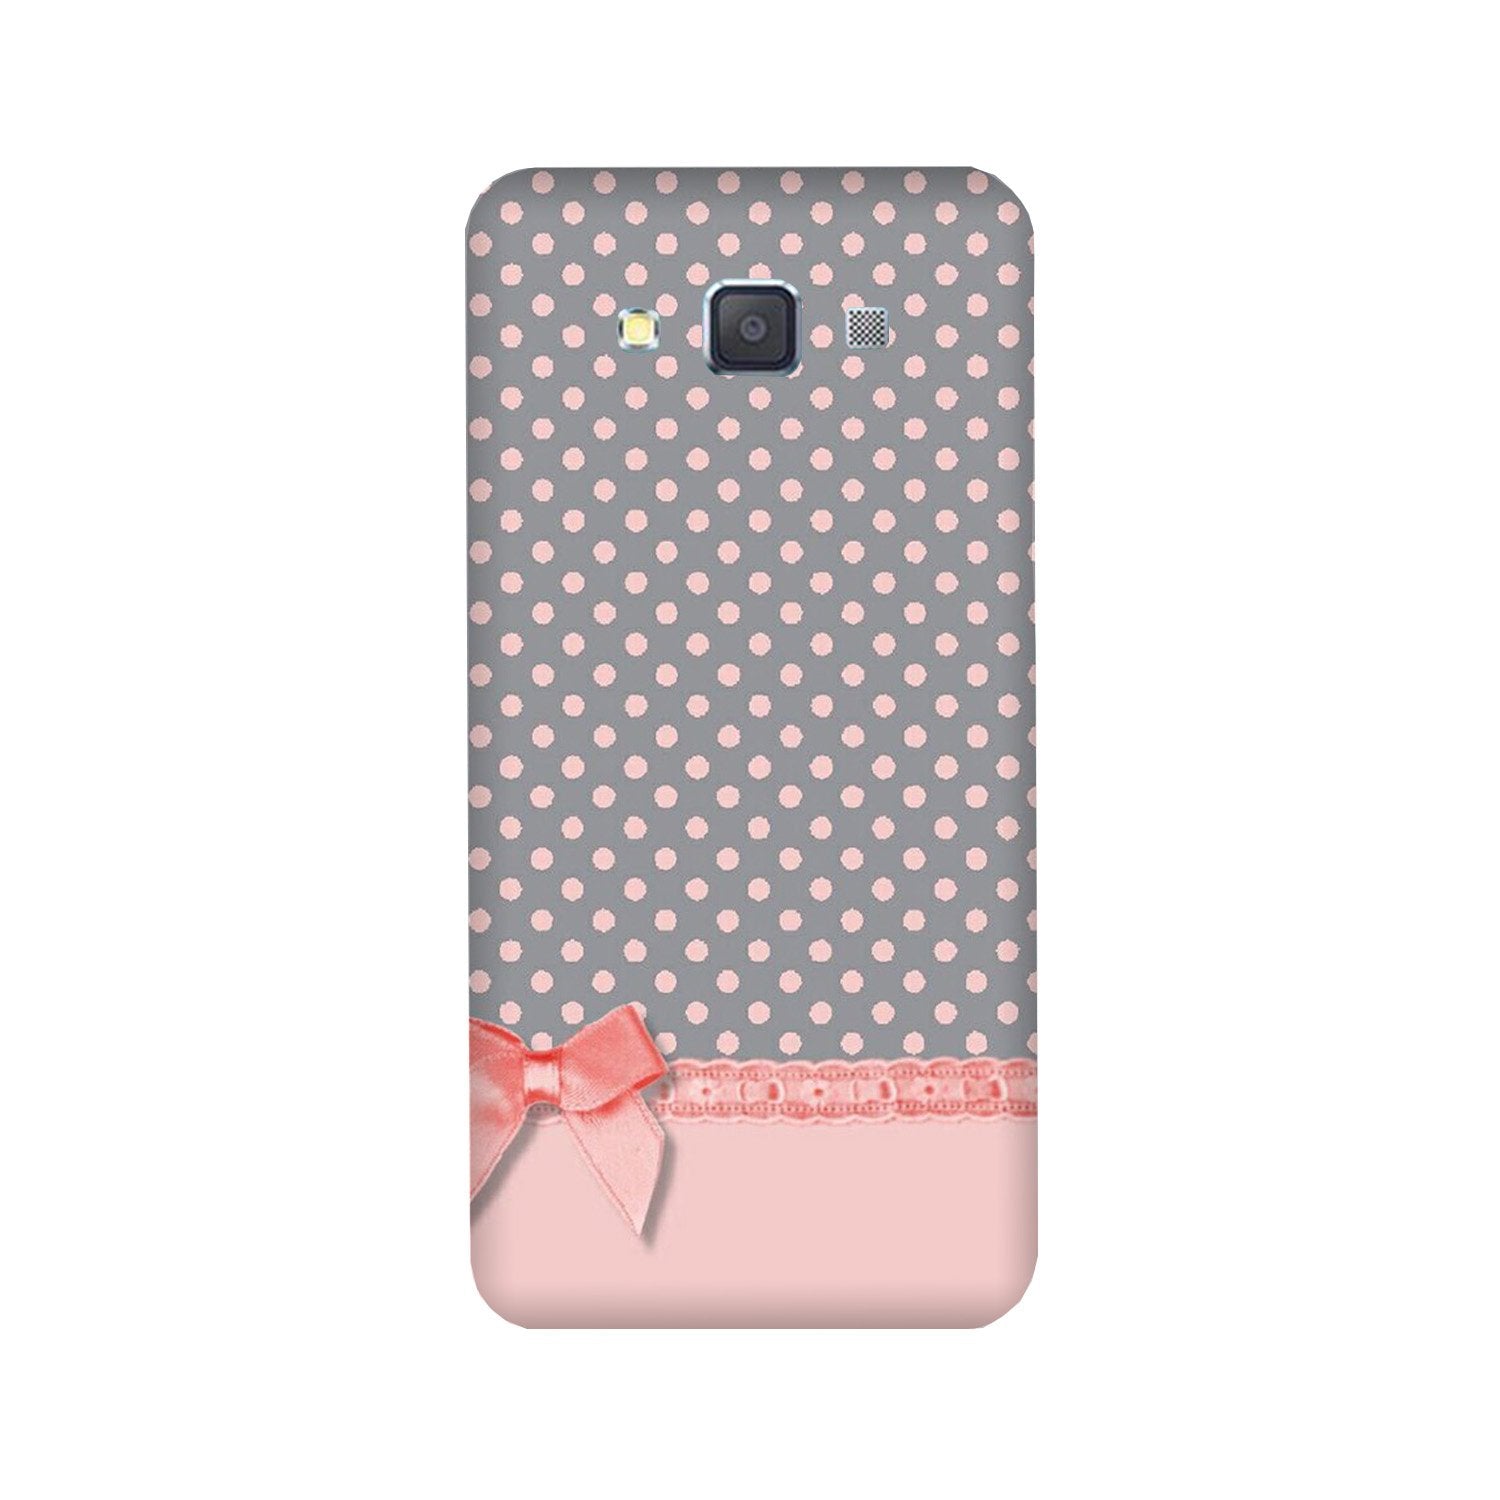 Gift Wrap2 Case for Galaxy Grand Max